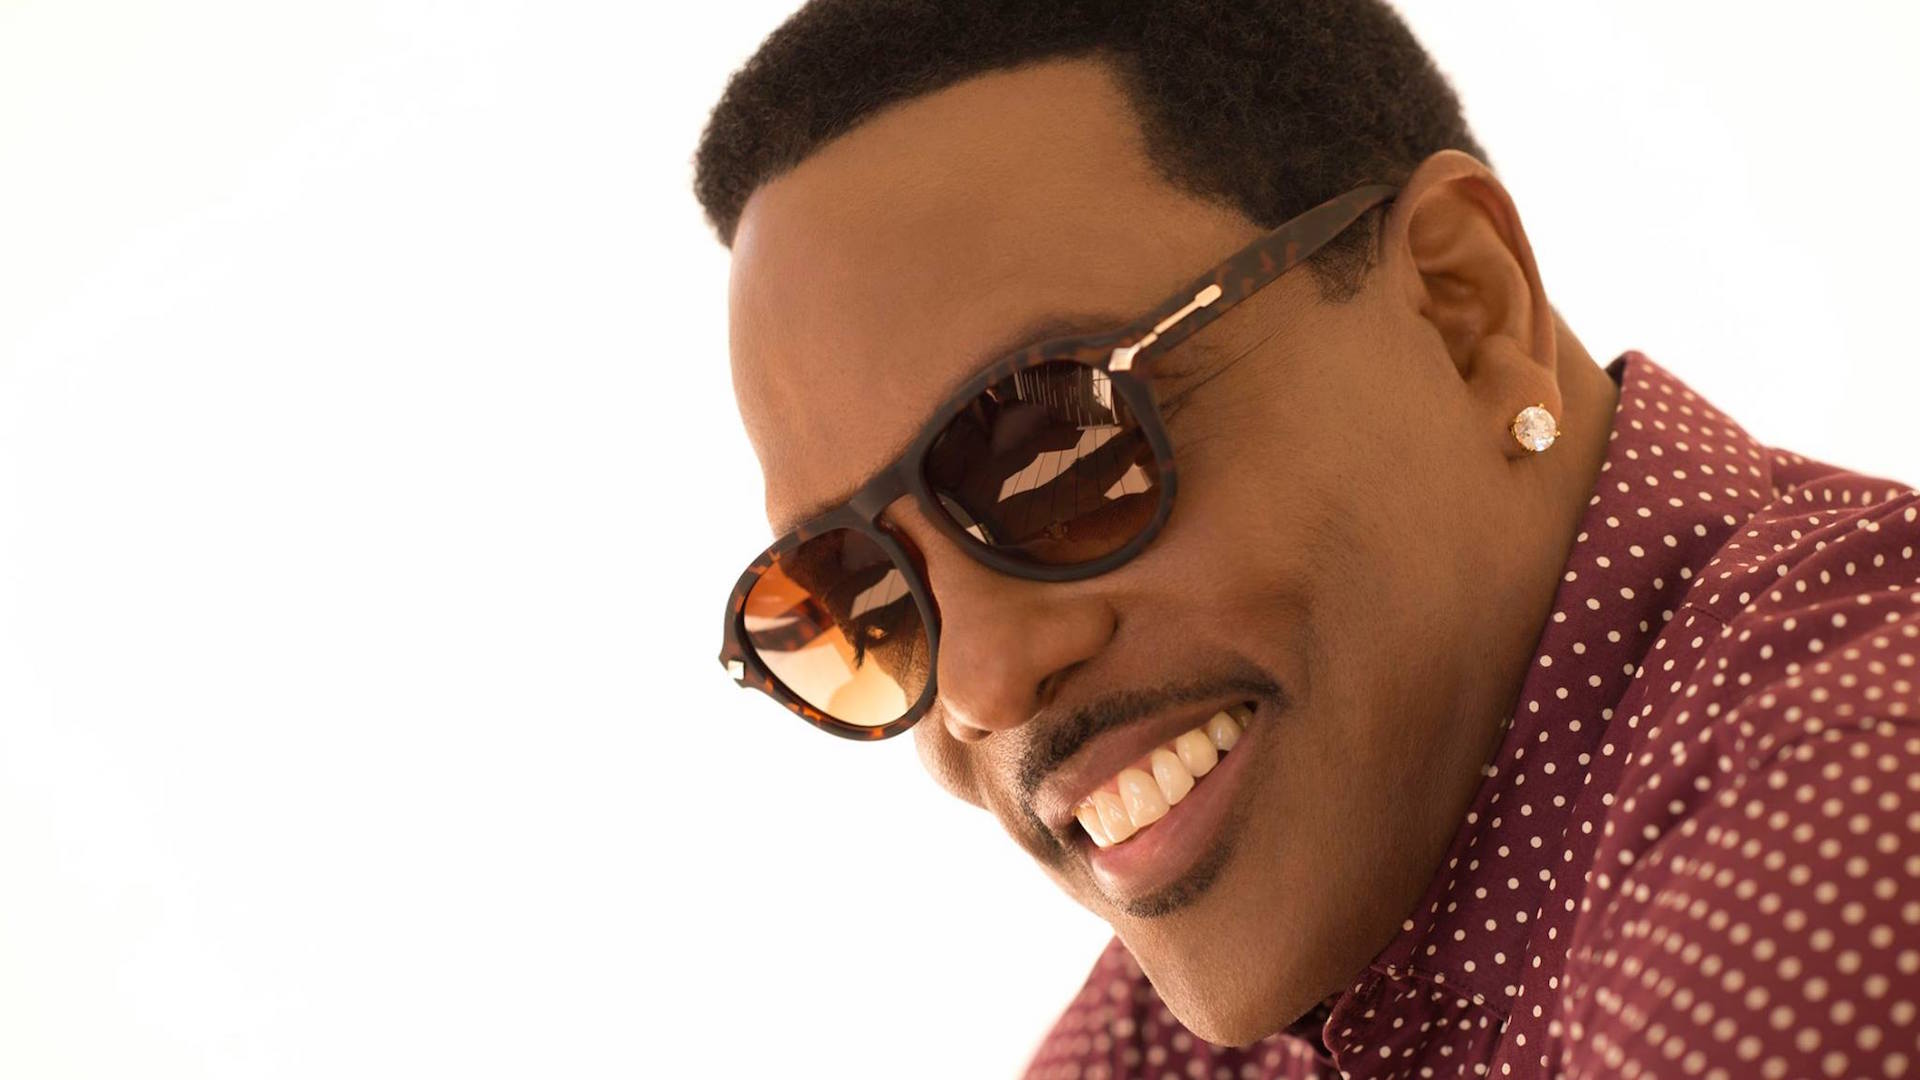 Tulsa's own eleven-time Grammy nominee, Charlie Wilson, is set to perform at The River Spirit Casino, Saturday, January 14th at 8 pm. Photo credit: www.soulfest.com